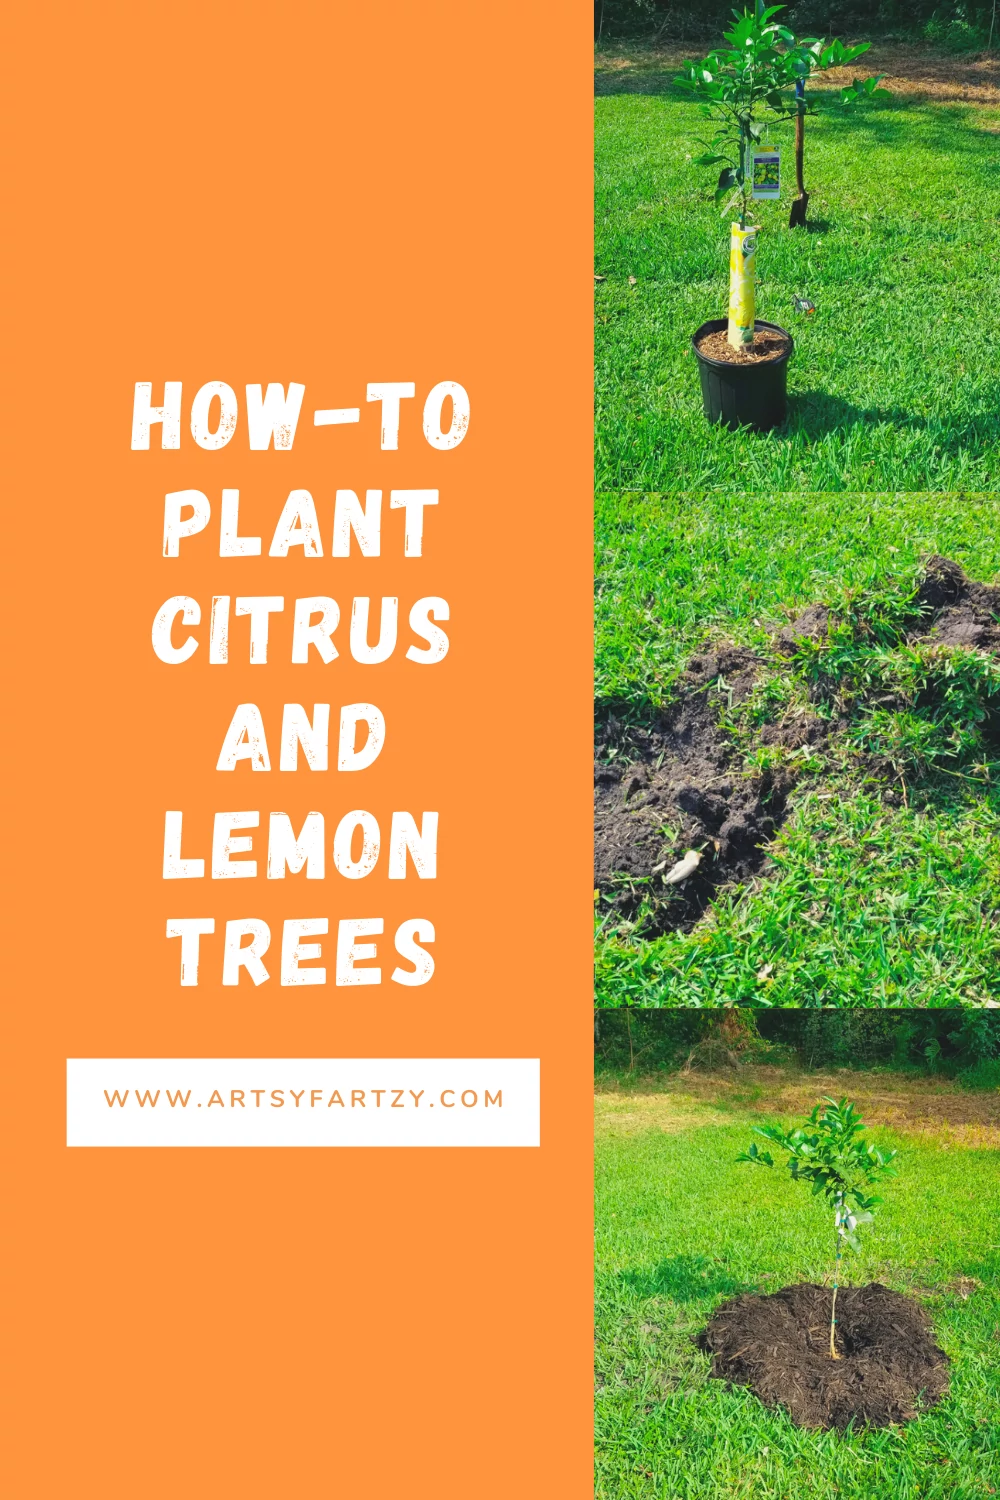 citrus and lemon trees how to plant